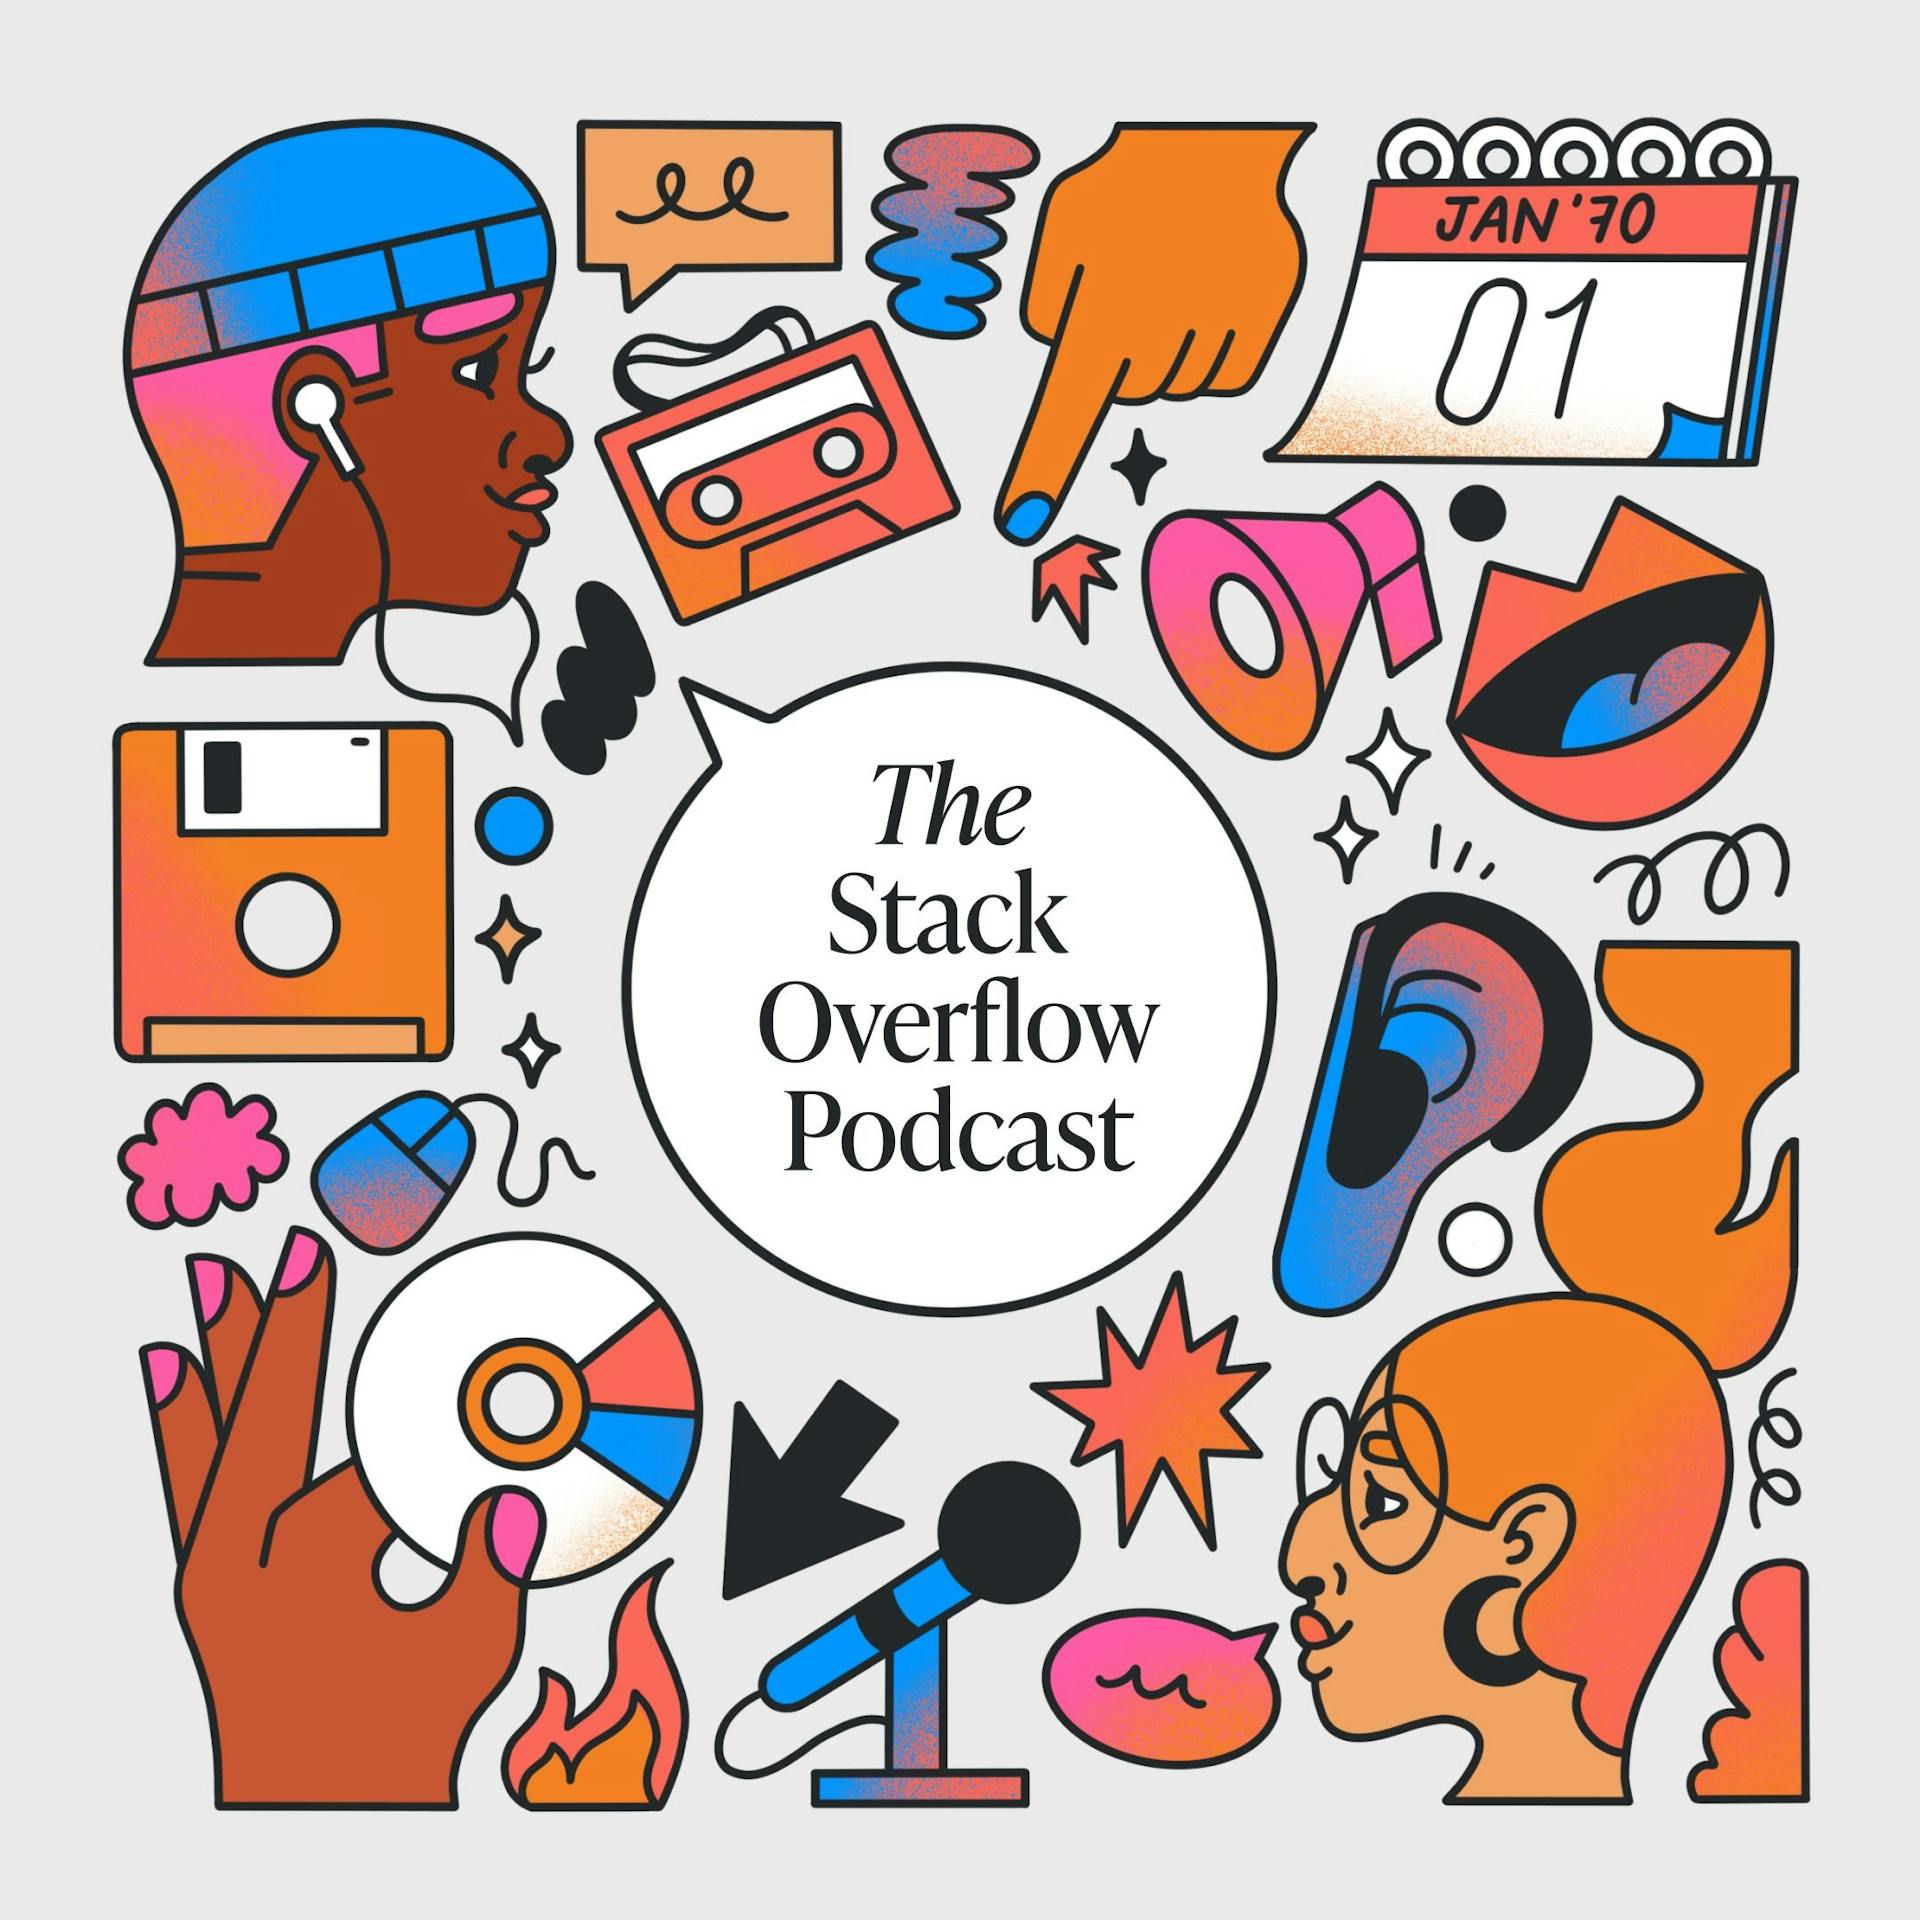 Review: The Stack Overflow Podcast